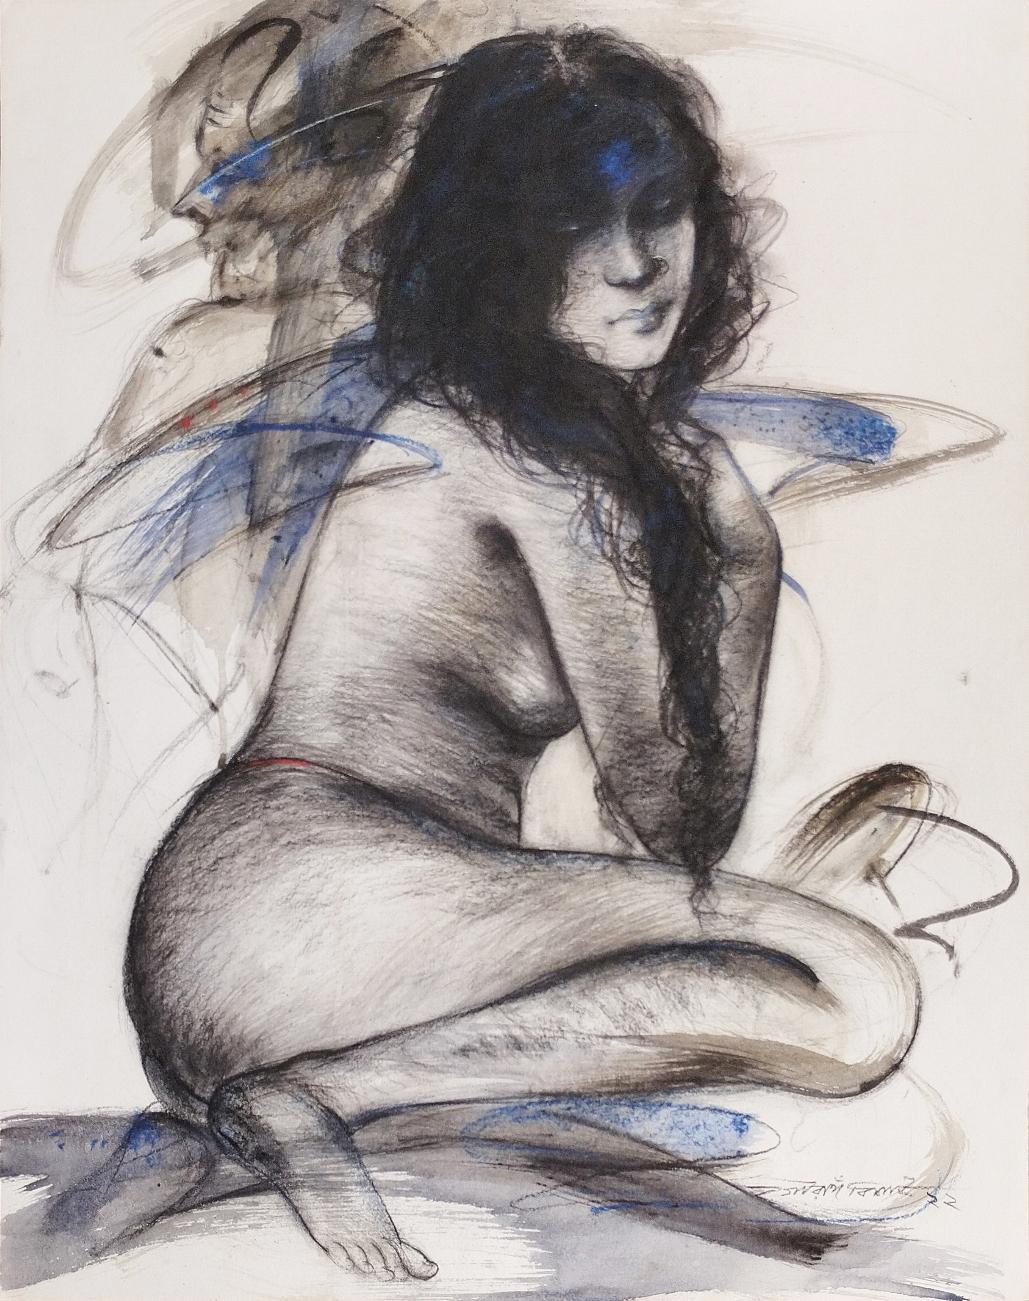 Gaurango Beshai  Figurative Painting - Untitled, Mixed Media on Paper by Contemporary Indian Artist “In Stock”